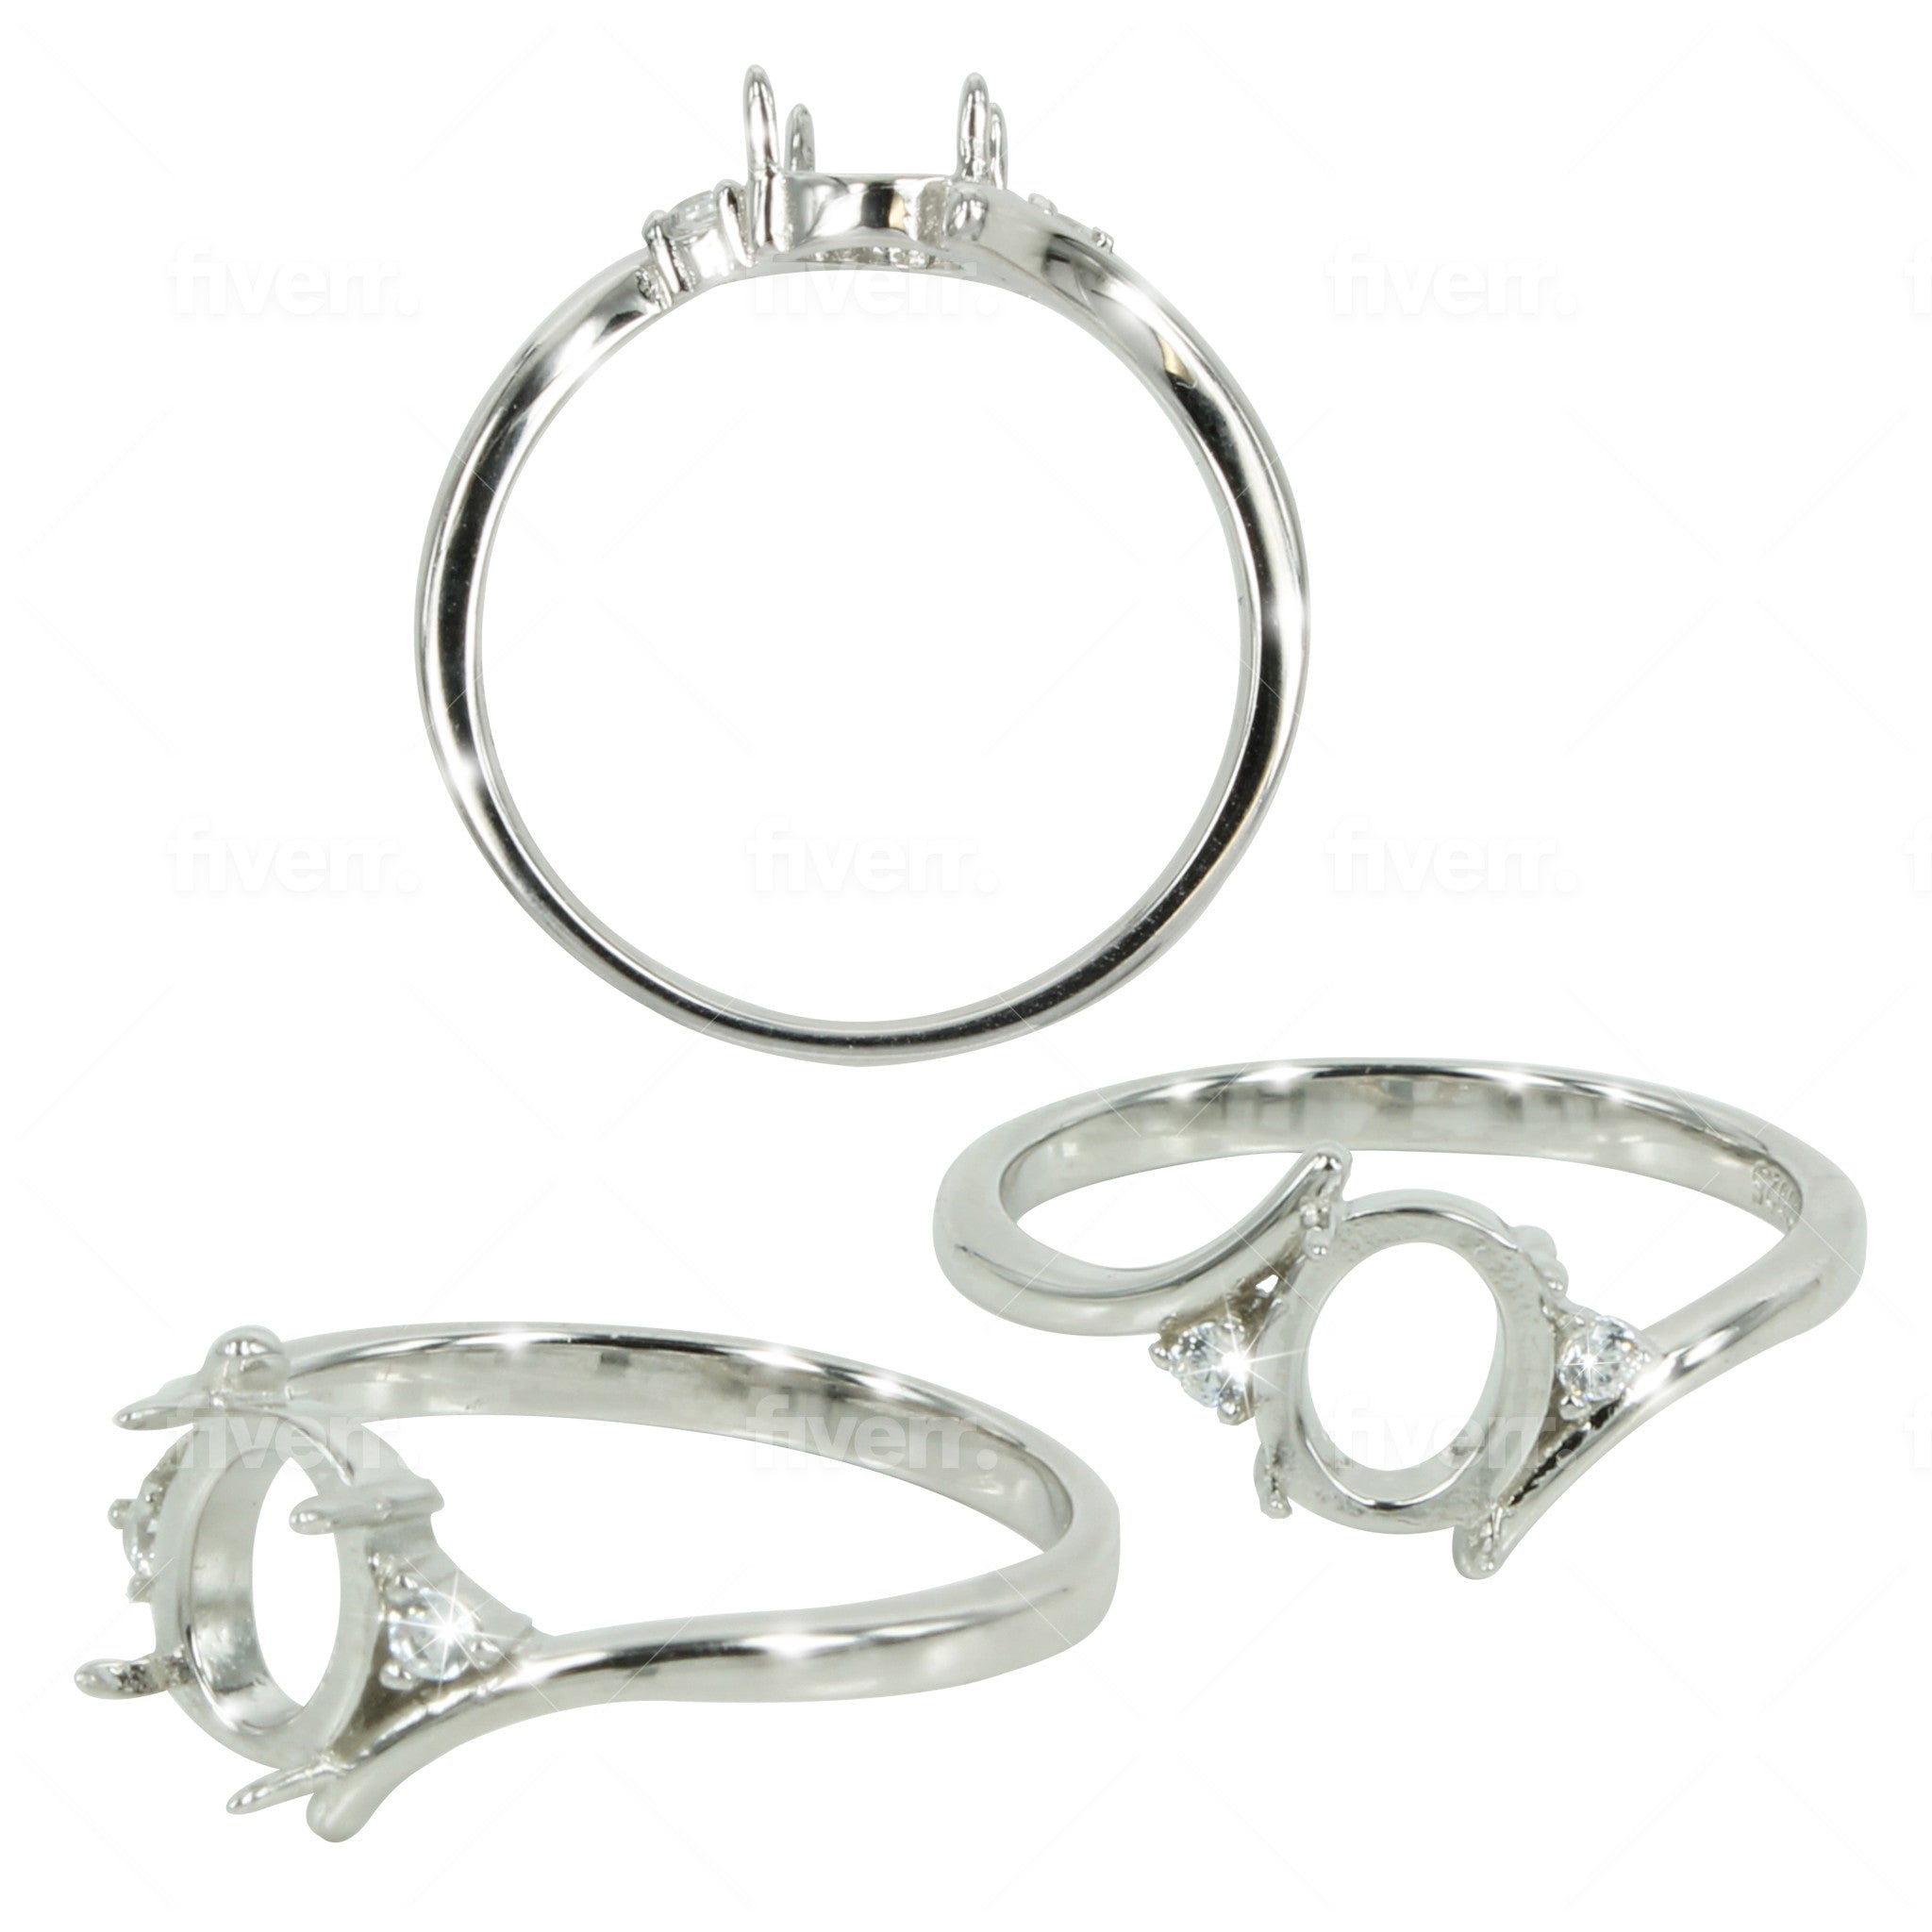 Offset Shank Ring  with CZ's in Sterling Silver for 6x7mm Oval Stones